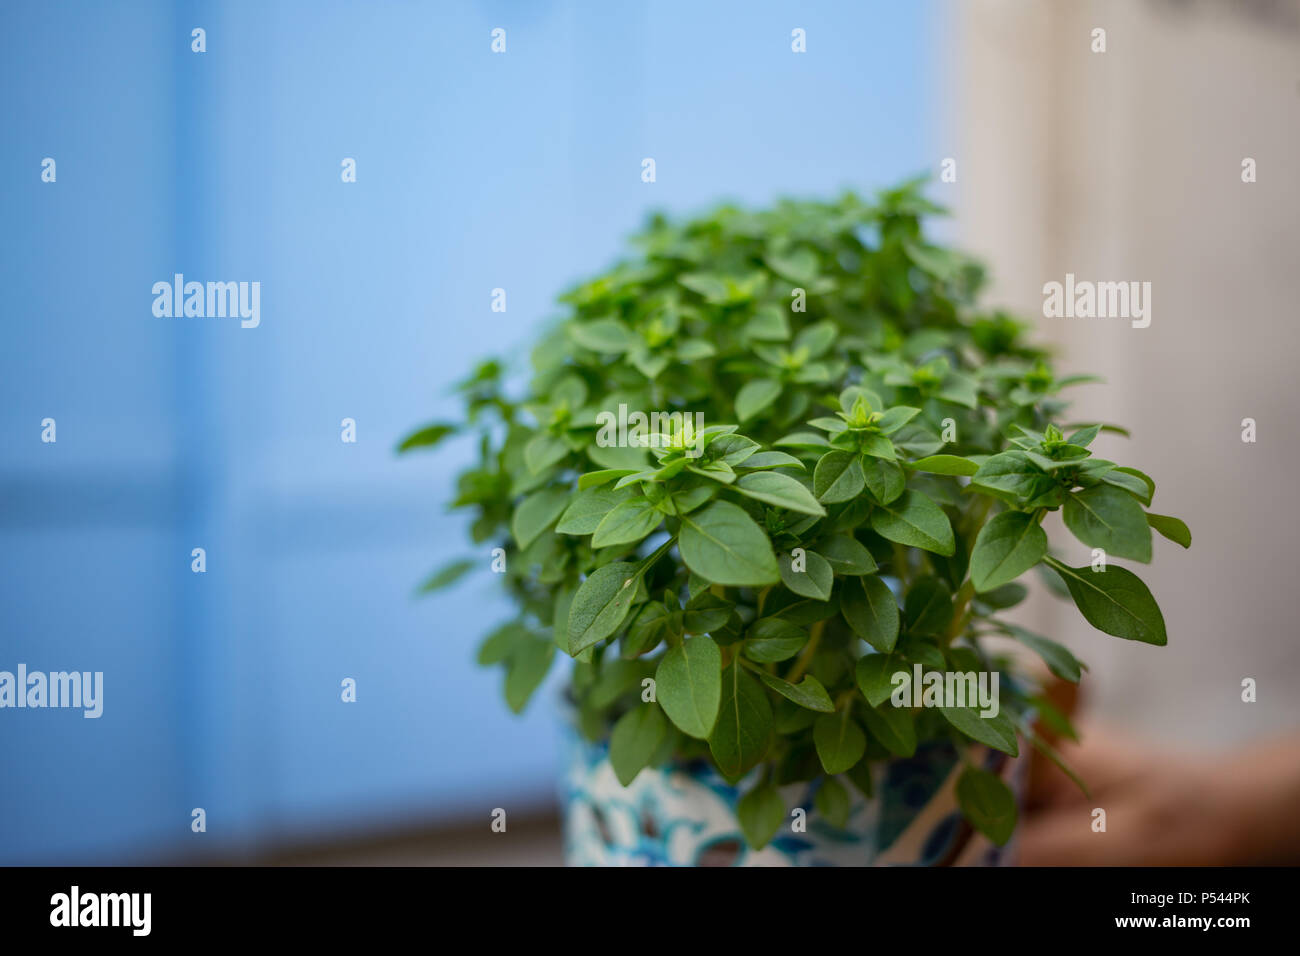 Fresh basilicum in a flowerpot. Green leaves of basil plant. Blur blue background, close up, space for text. Stock Photo